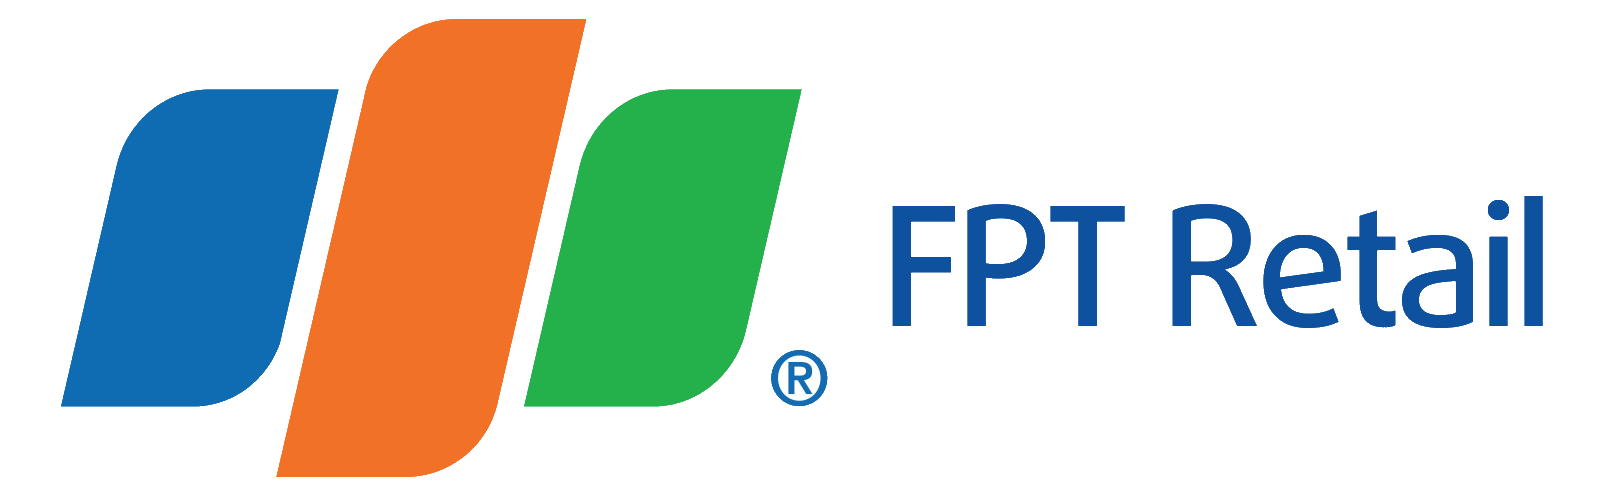 FPT Digital Retail Joint Stock Company